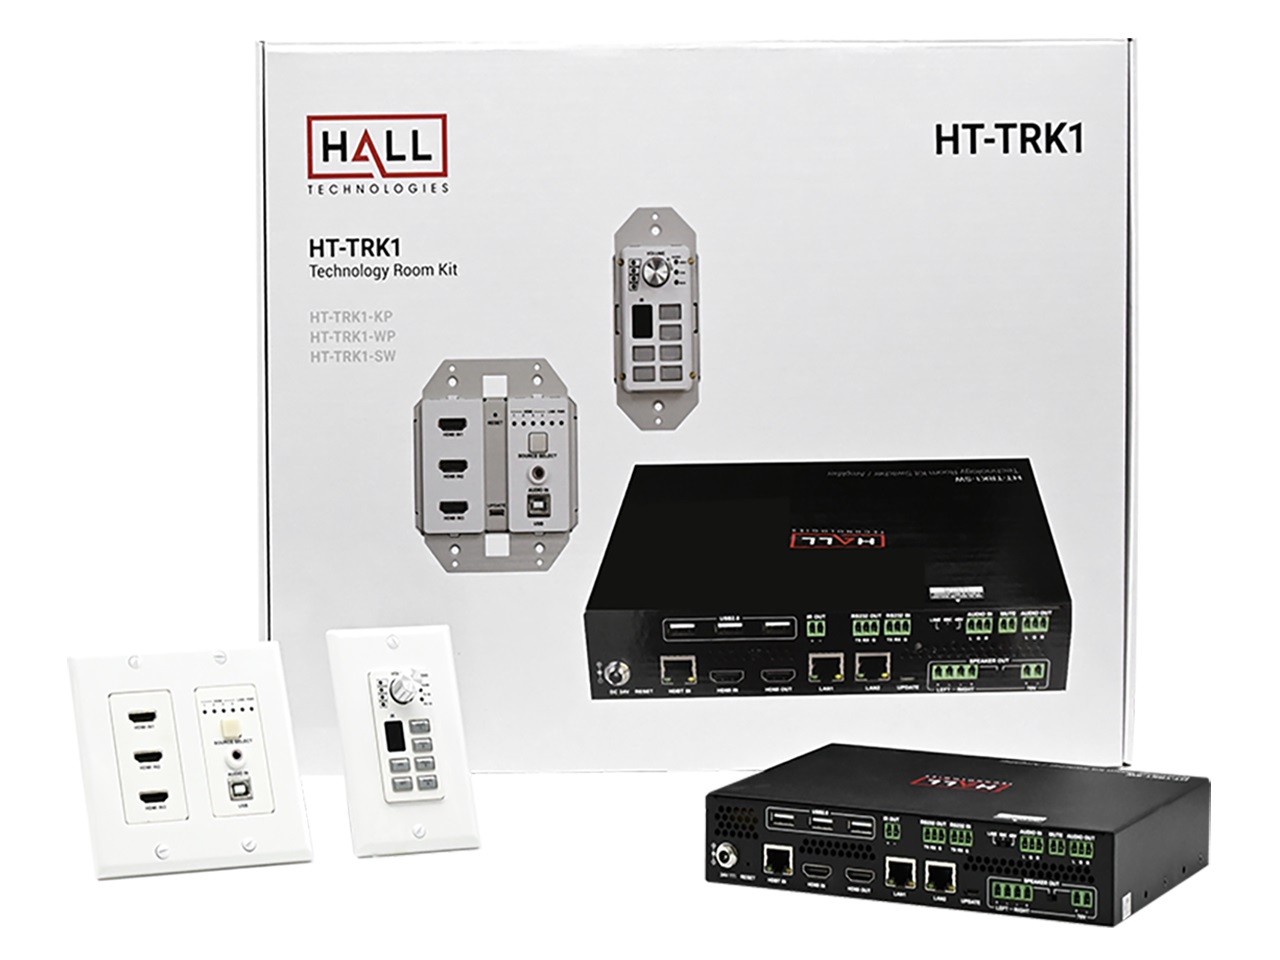 HT-TRK1 Apollo Technology Room Kit by Hall Technologies